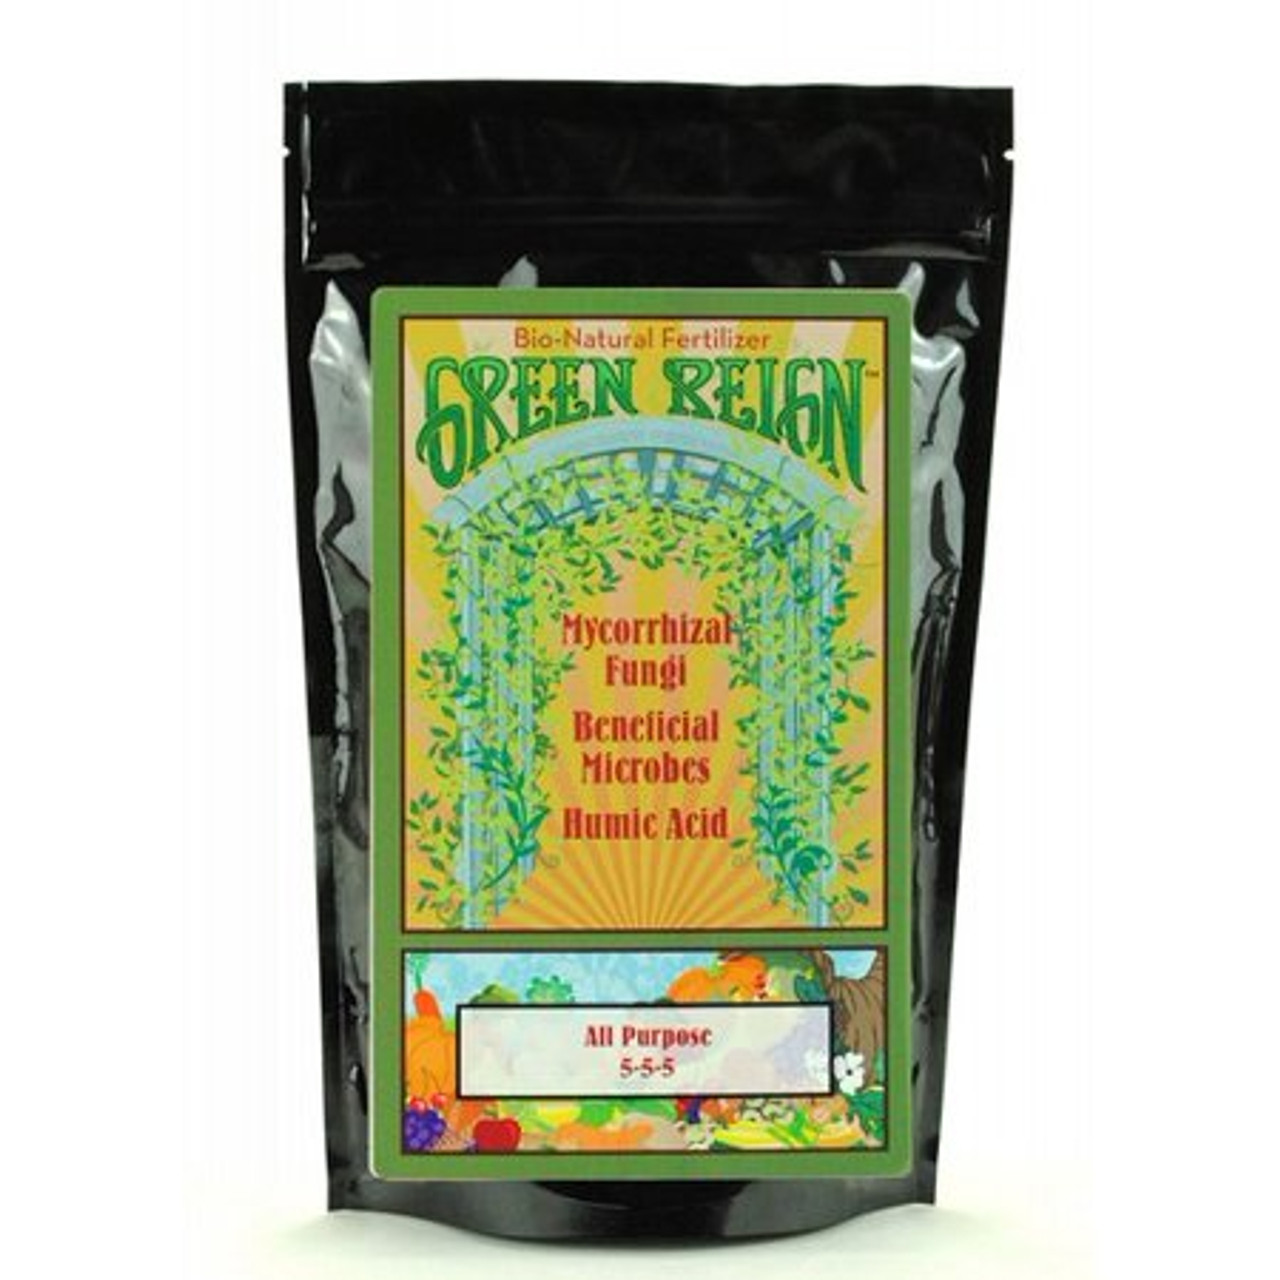 Green Reign All Purpose 5-5-5 2 lbs